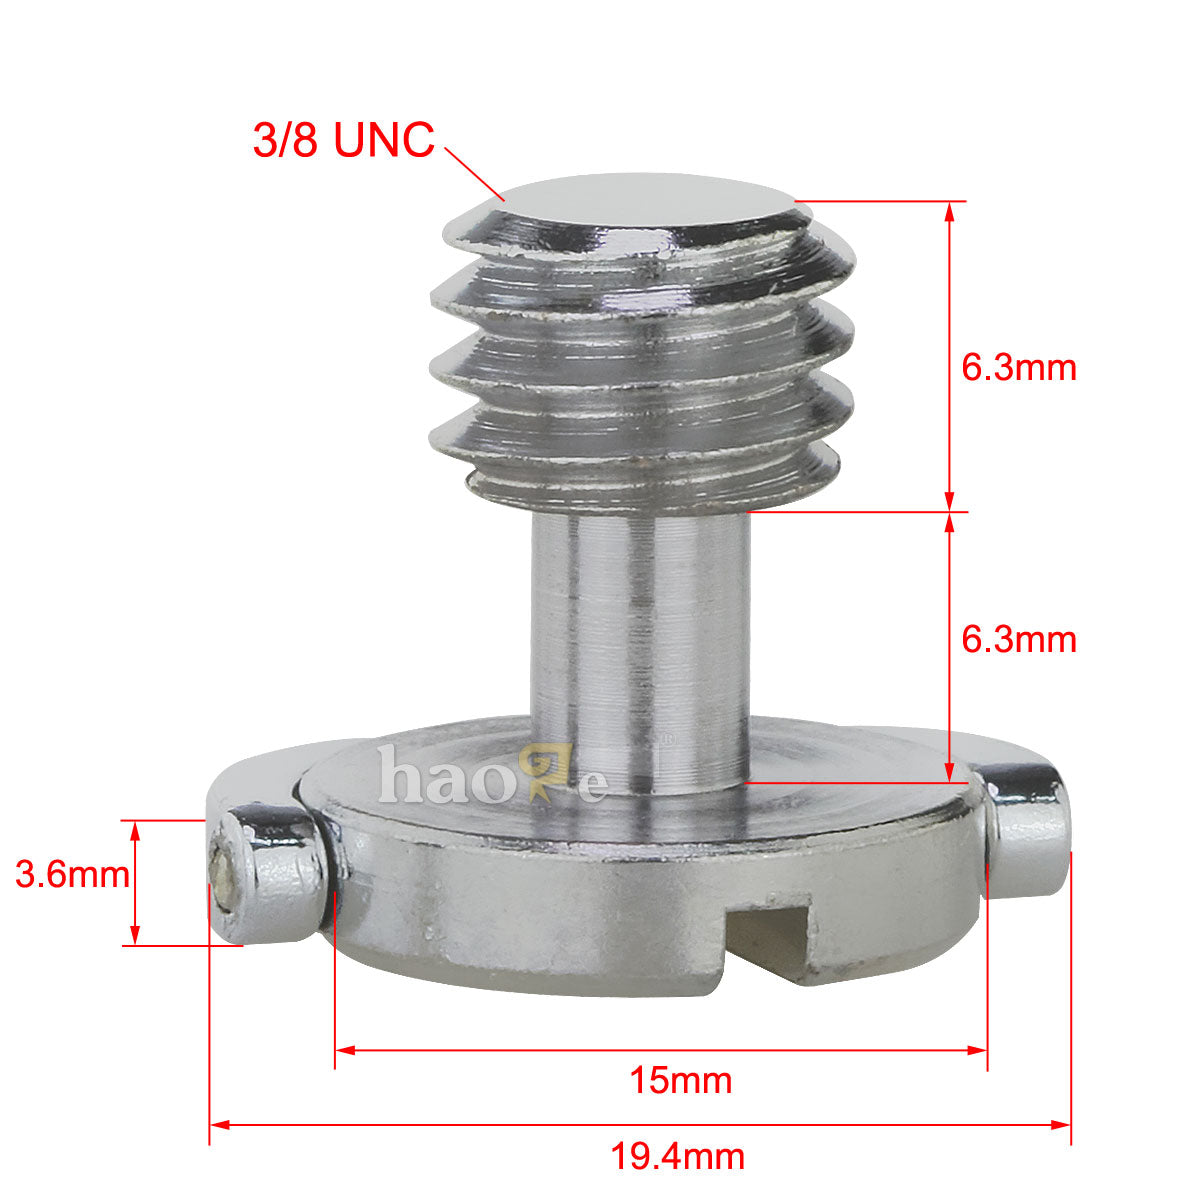 Haoge 3/8" D-Ring Stainless Steel Mounting Fixing Screw for Camera Tripod Monopod Quick Release Plate